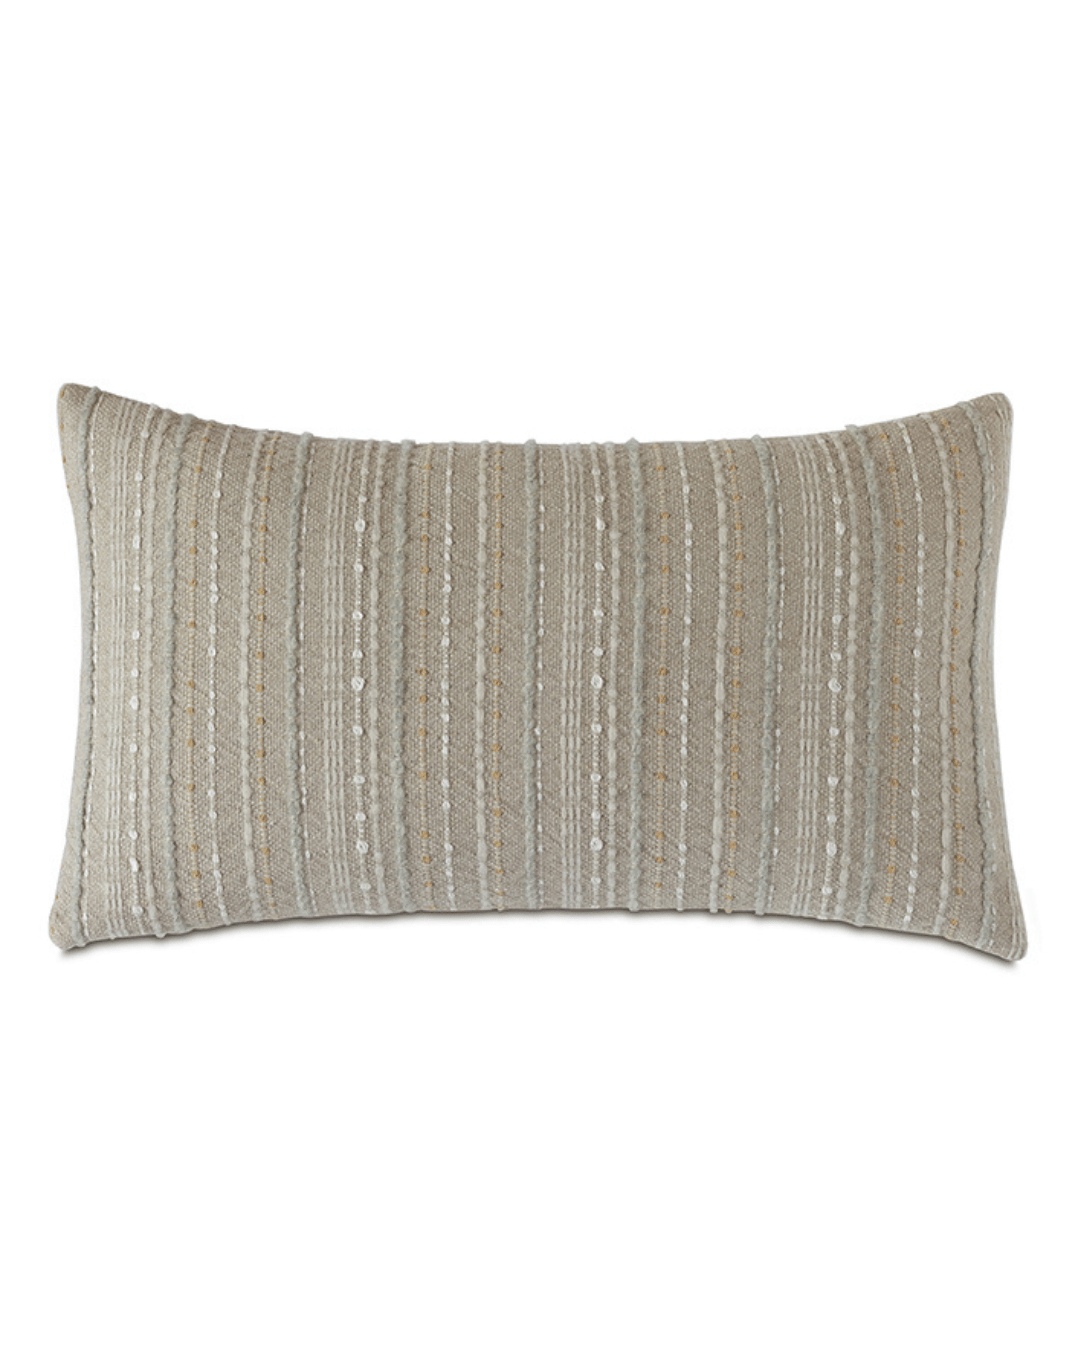 A rectangular RICH TEXTURED DECORATIVE PILLOW by Eastern Accents with a textured beige surface featuring multiple muted gold and silver stripes, isolated on a white background, perfect for a Scottsdale Arizona bungalow.